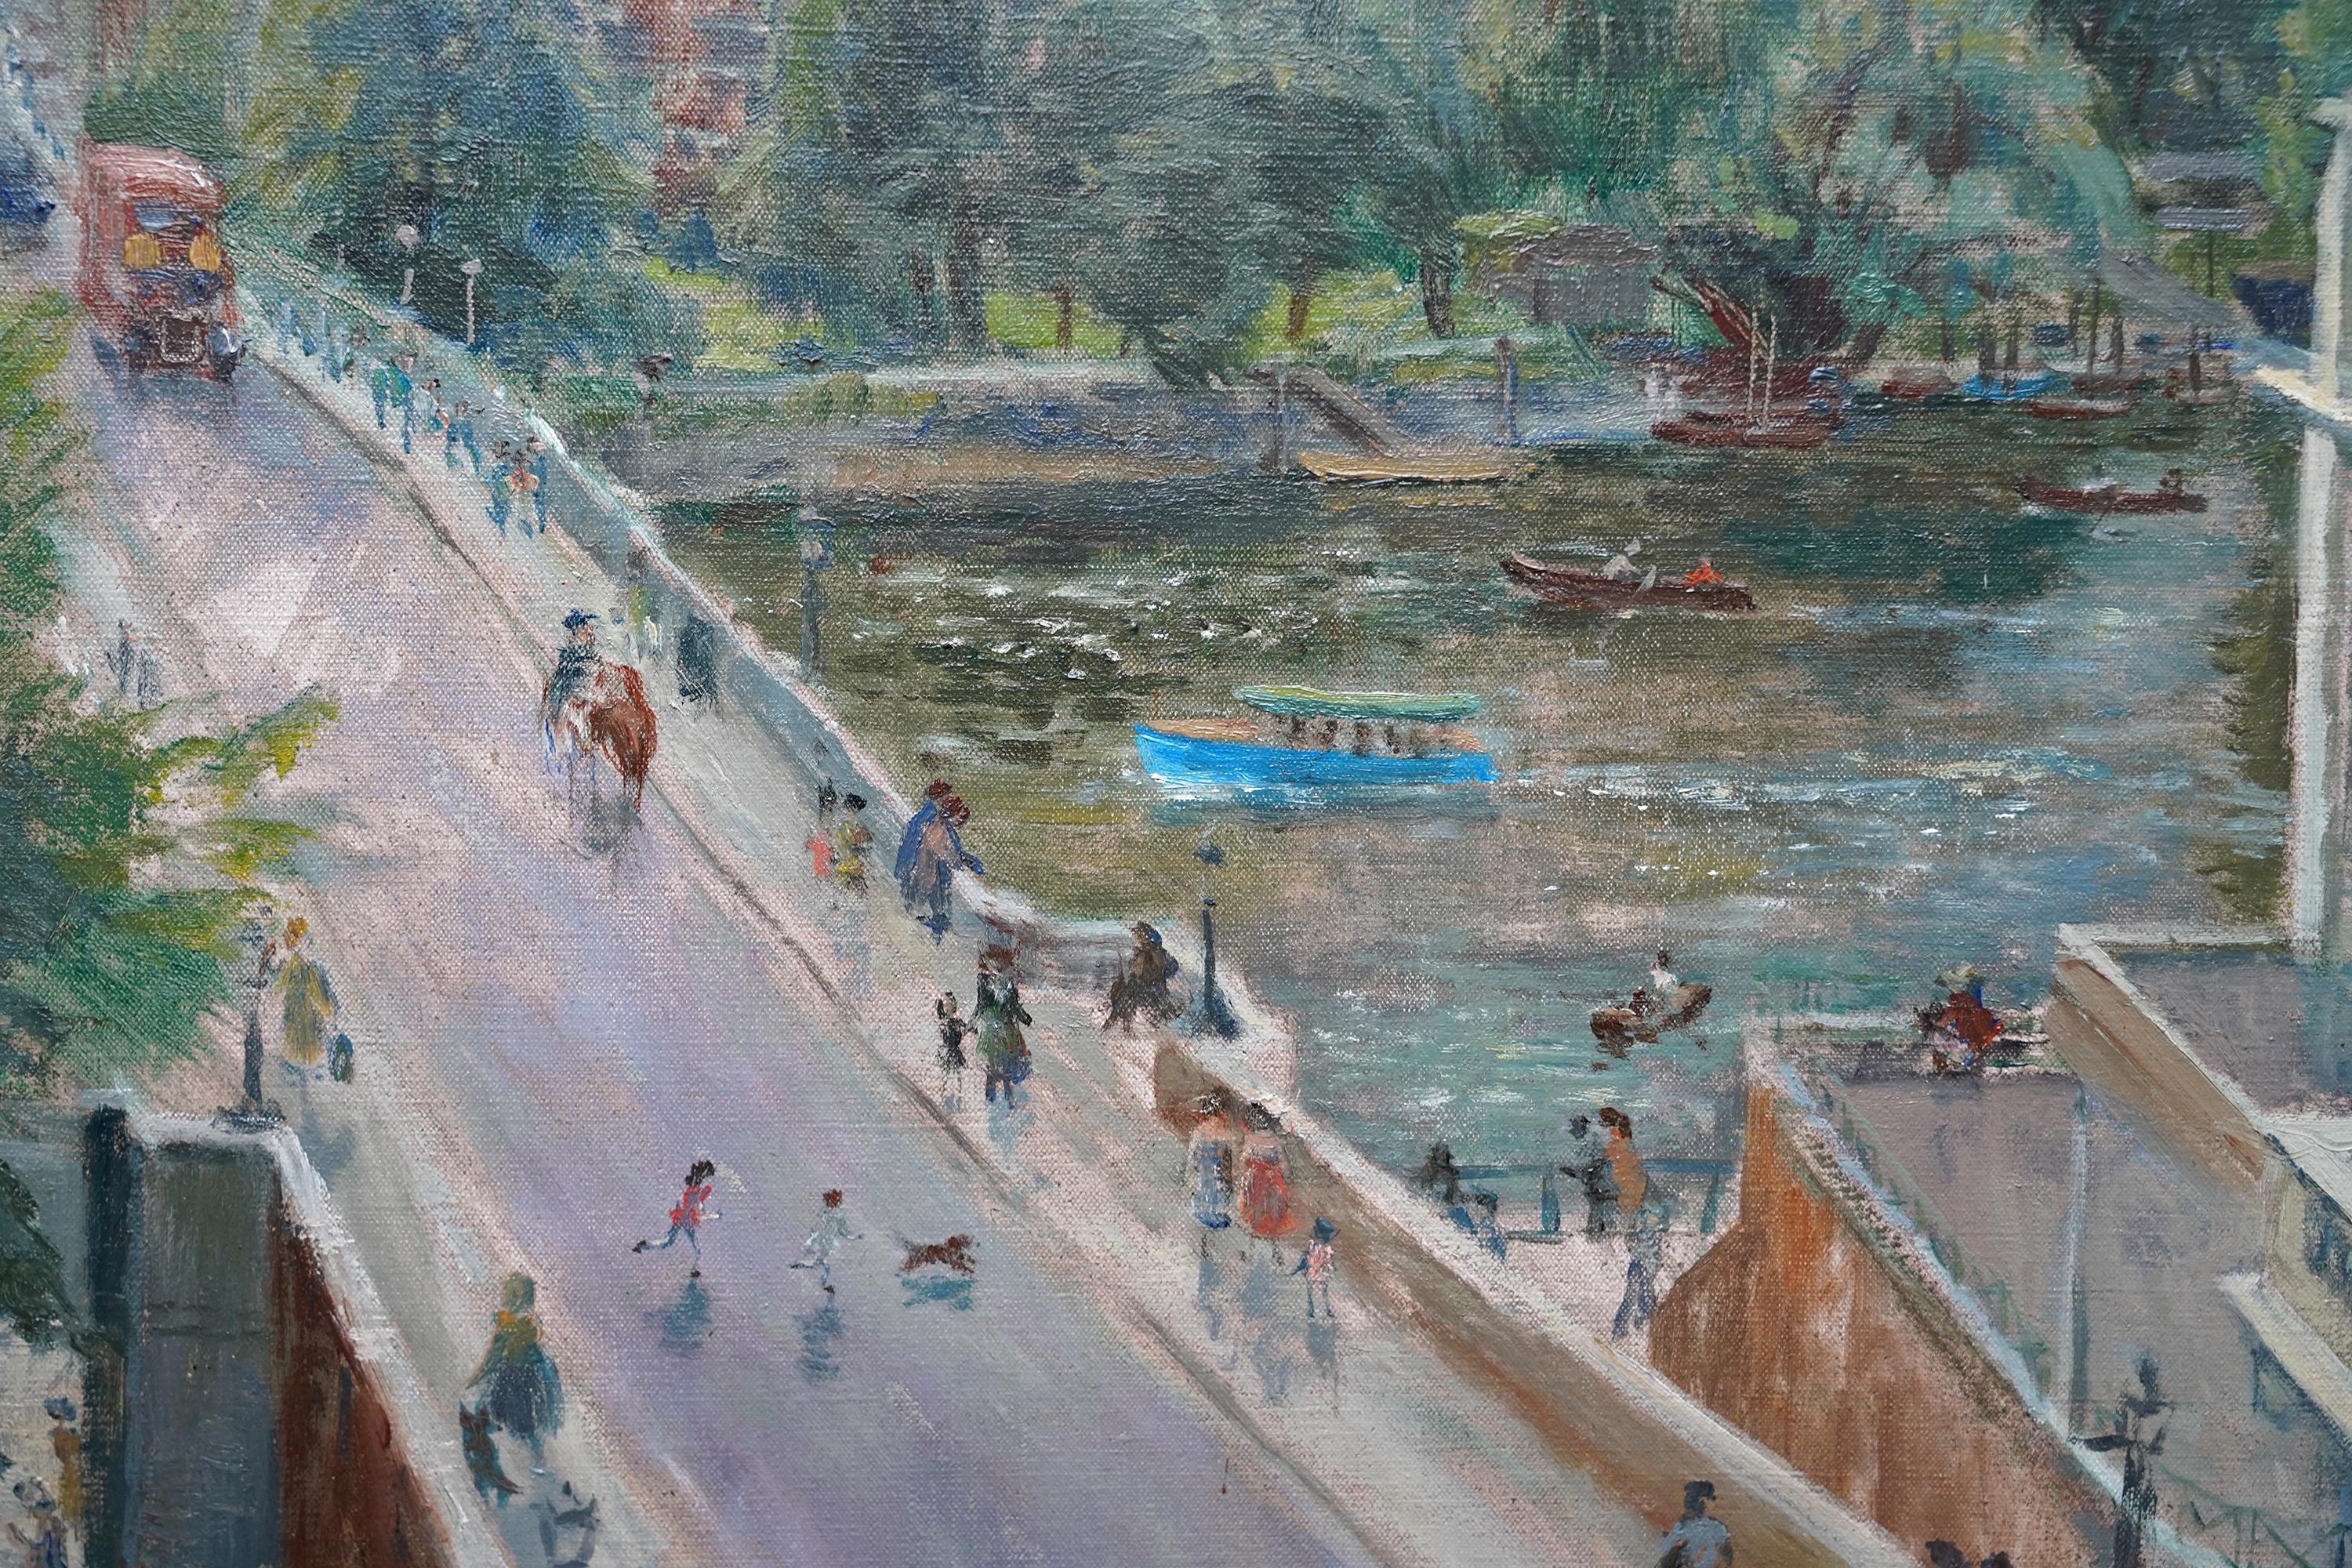 This lovely city landscape oil painting is by noted British artist Dennis Gilbert. Painted in 1970 from an elevated perspective, the composition is of Richmond Bridge, spanning the River Thames. The large building on the right of the bridge in the